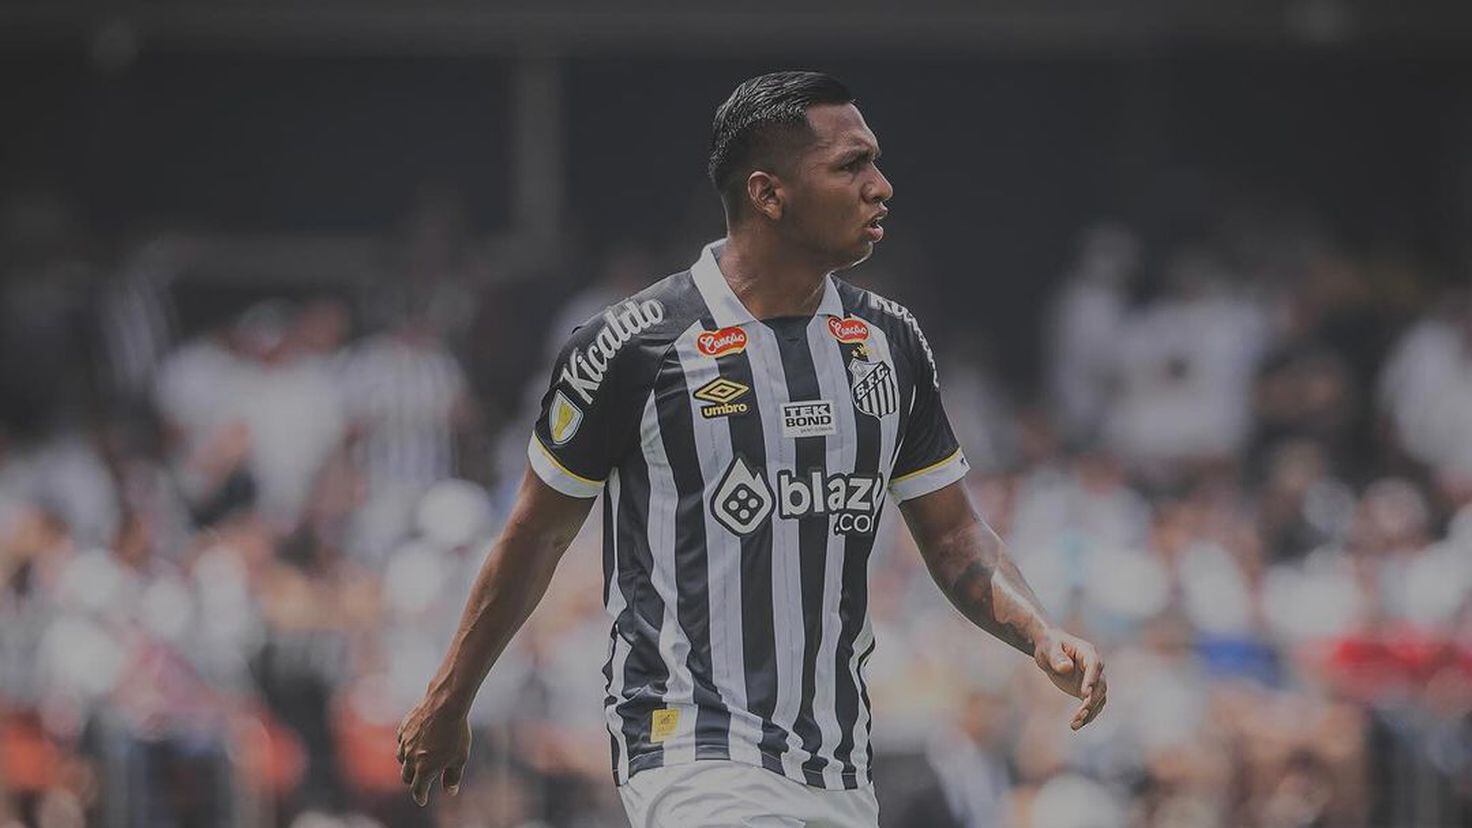 Morelos grows in Santos with the support of Karel